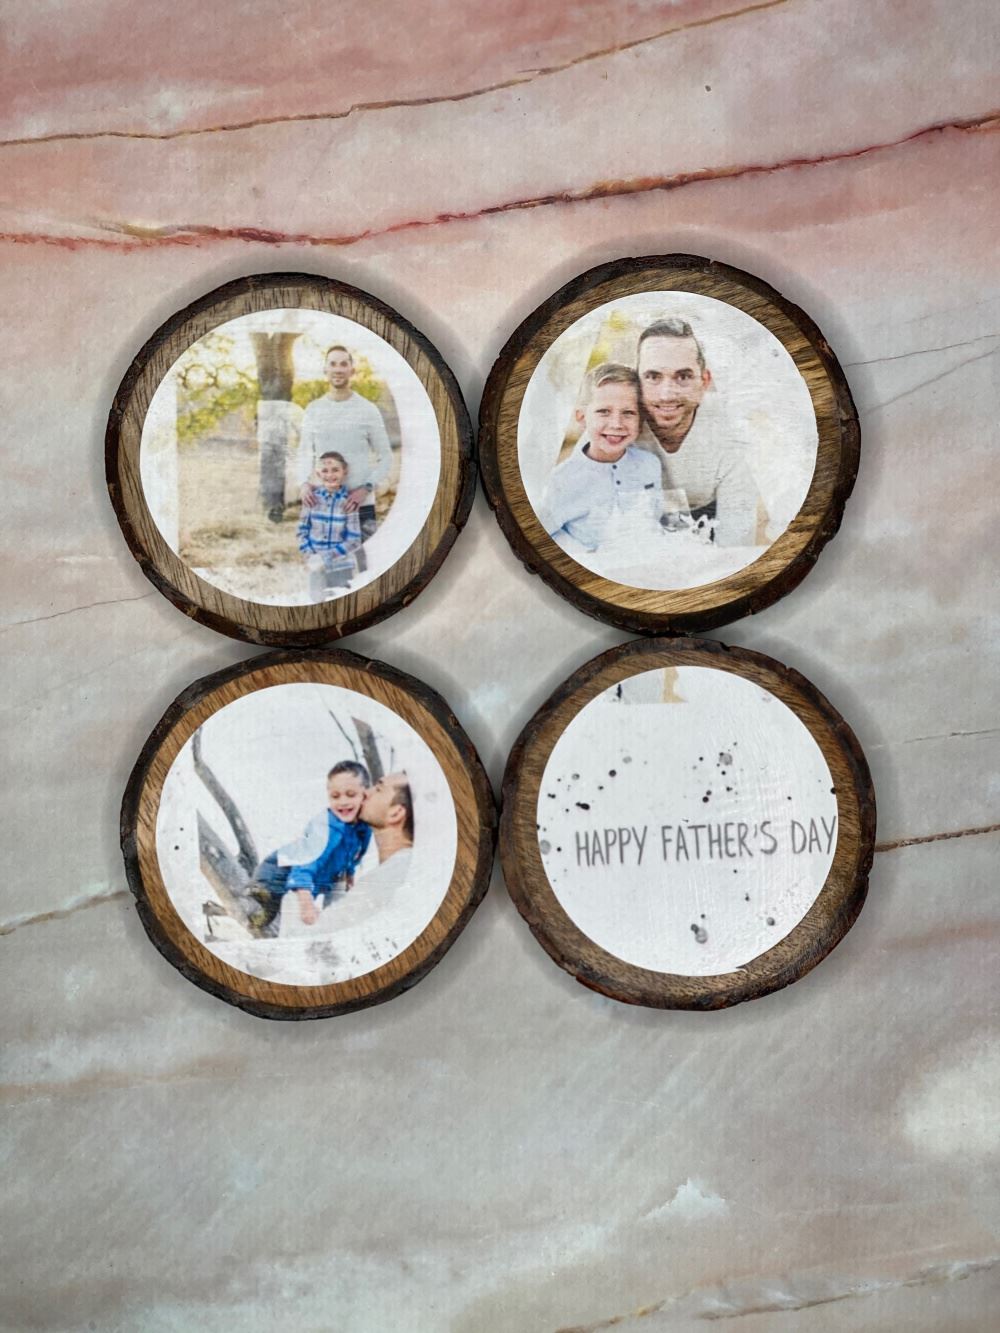 DIY Photo Coasters for Father's Day